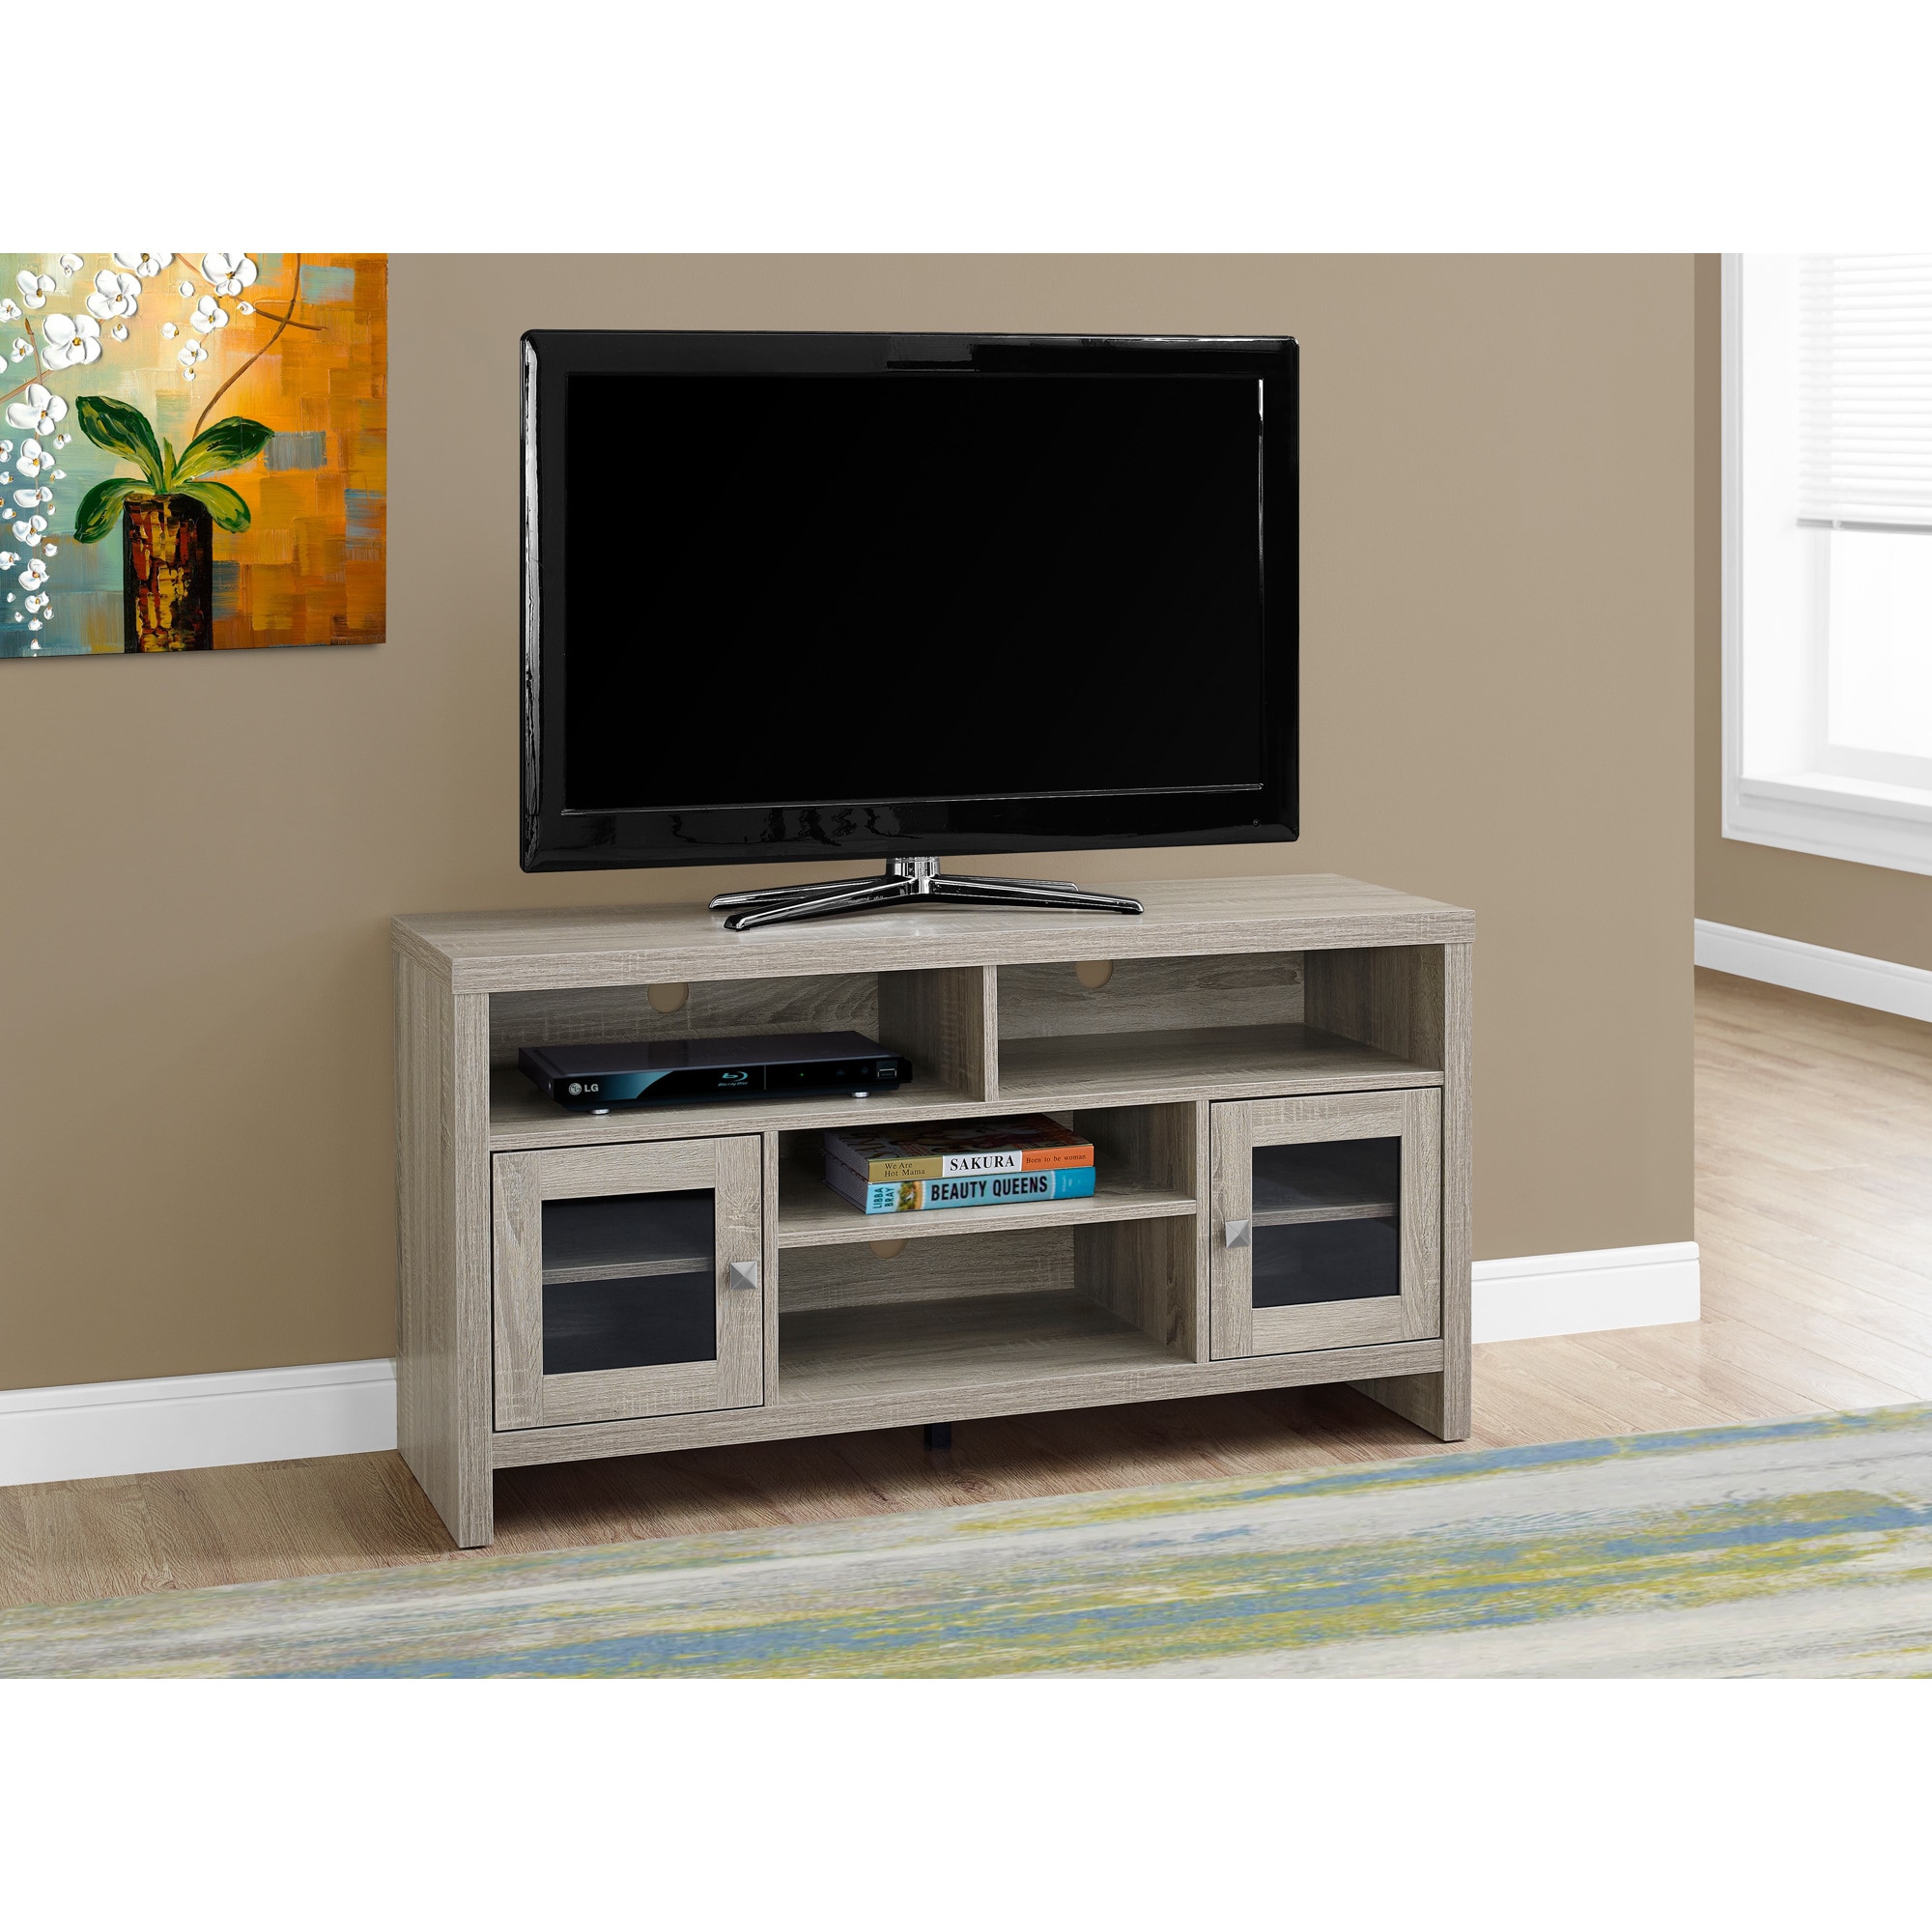 Shop Dark Taupe Mdf 48 Inch Tv Stand With Glass Doors Overstock